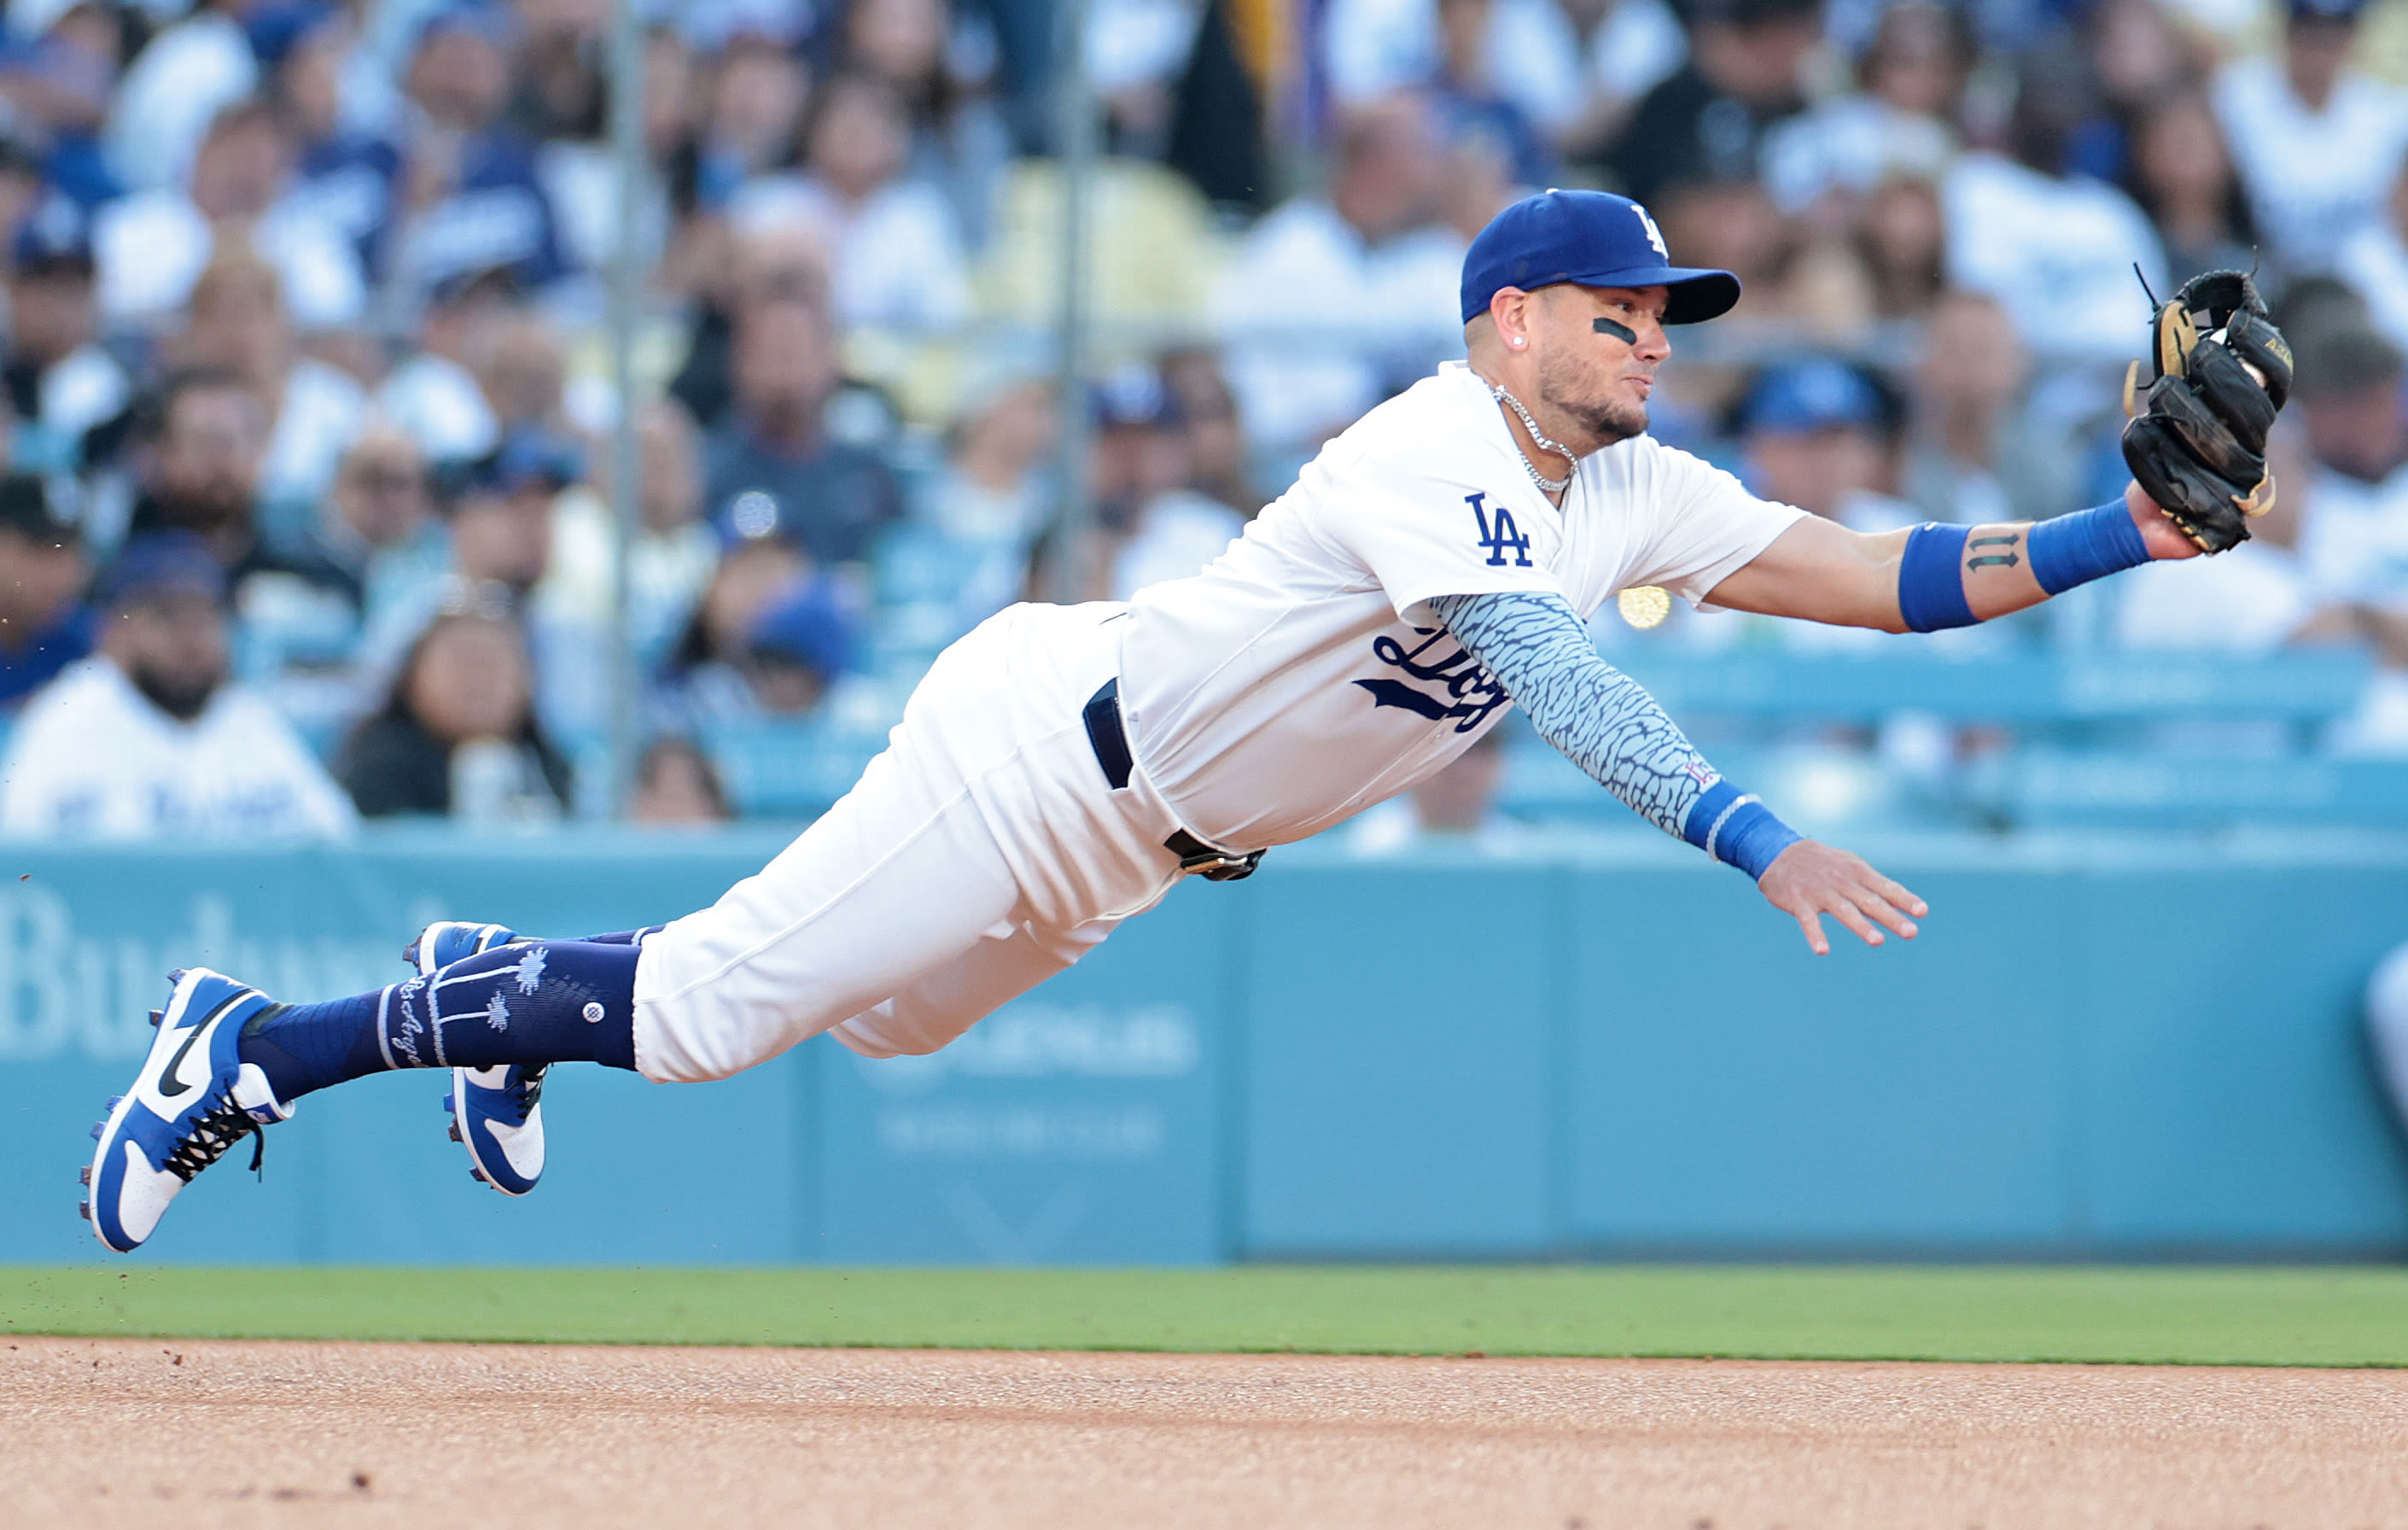 Miguel Rojas is shining at shortstop. Will Dodgers keep him there when Mookie Betts returns?